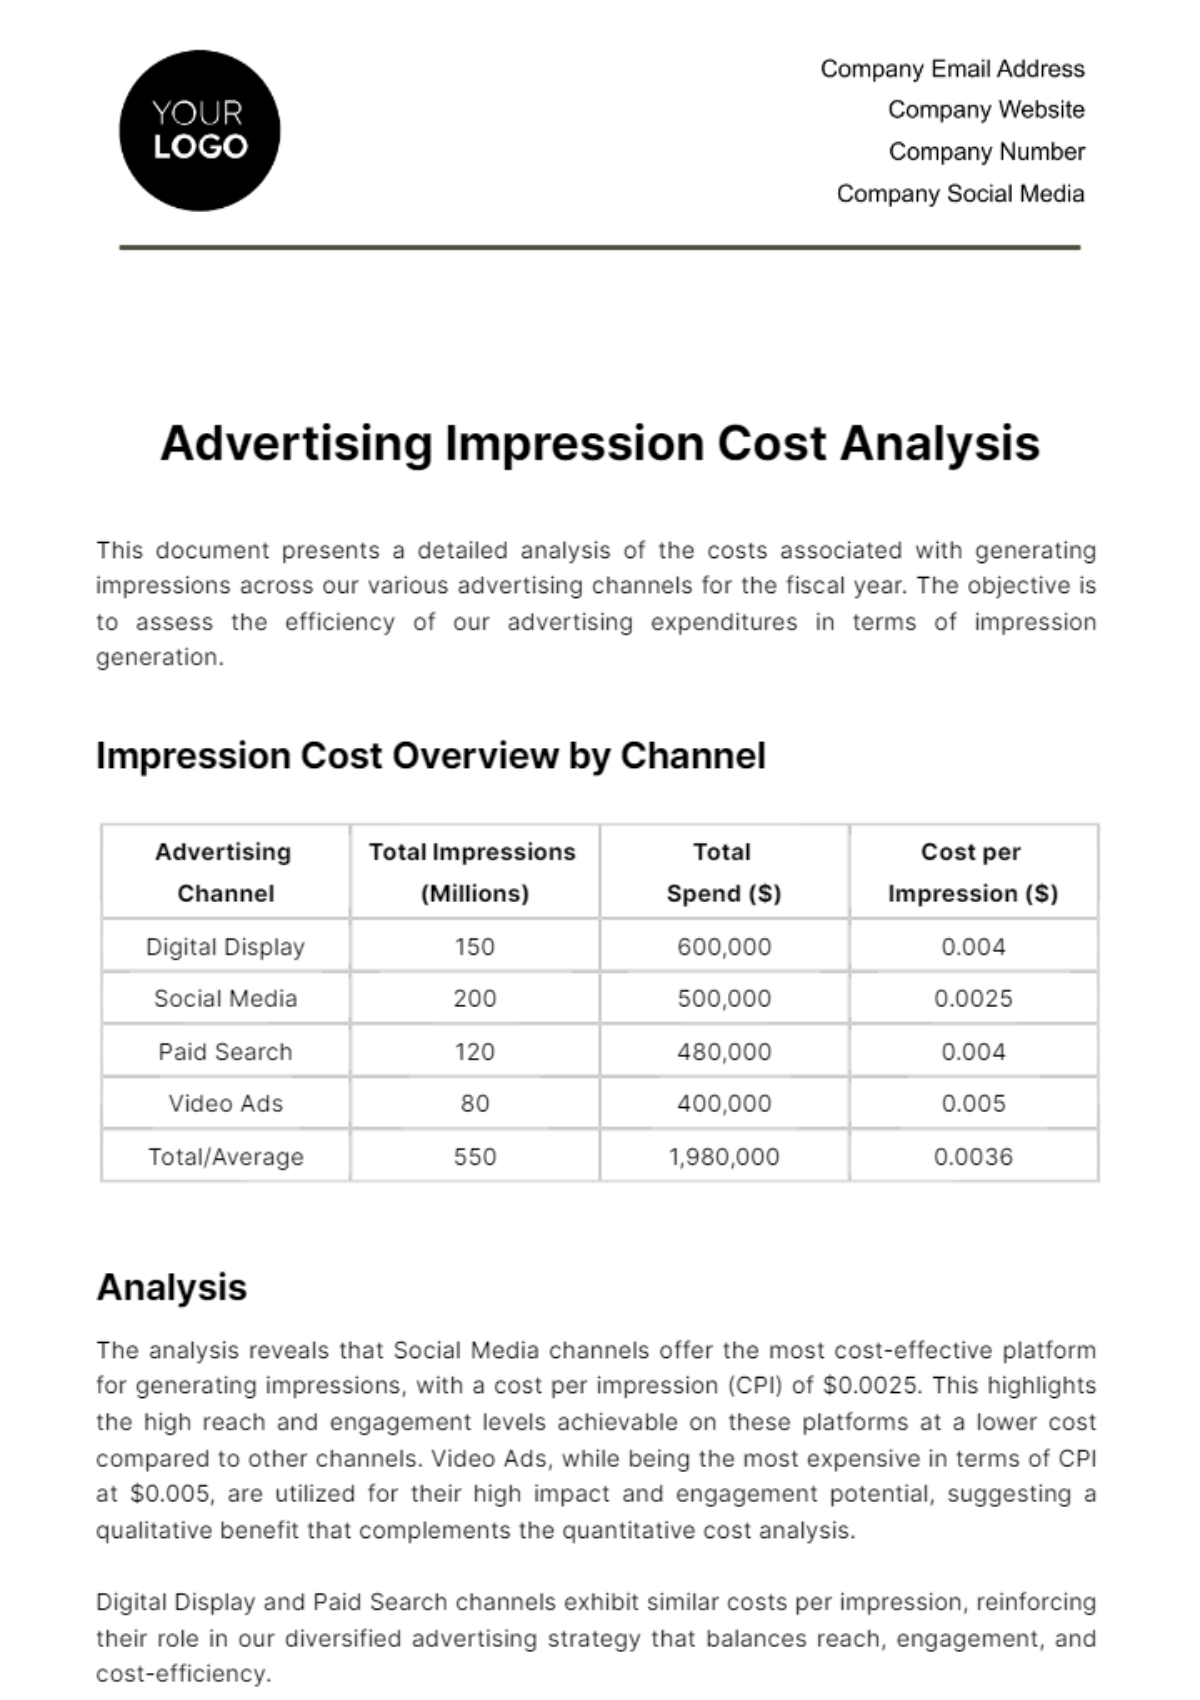 Free Advertising Impression Cost Analysis Template